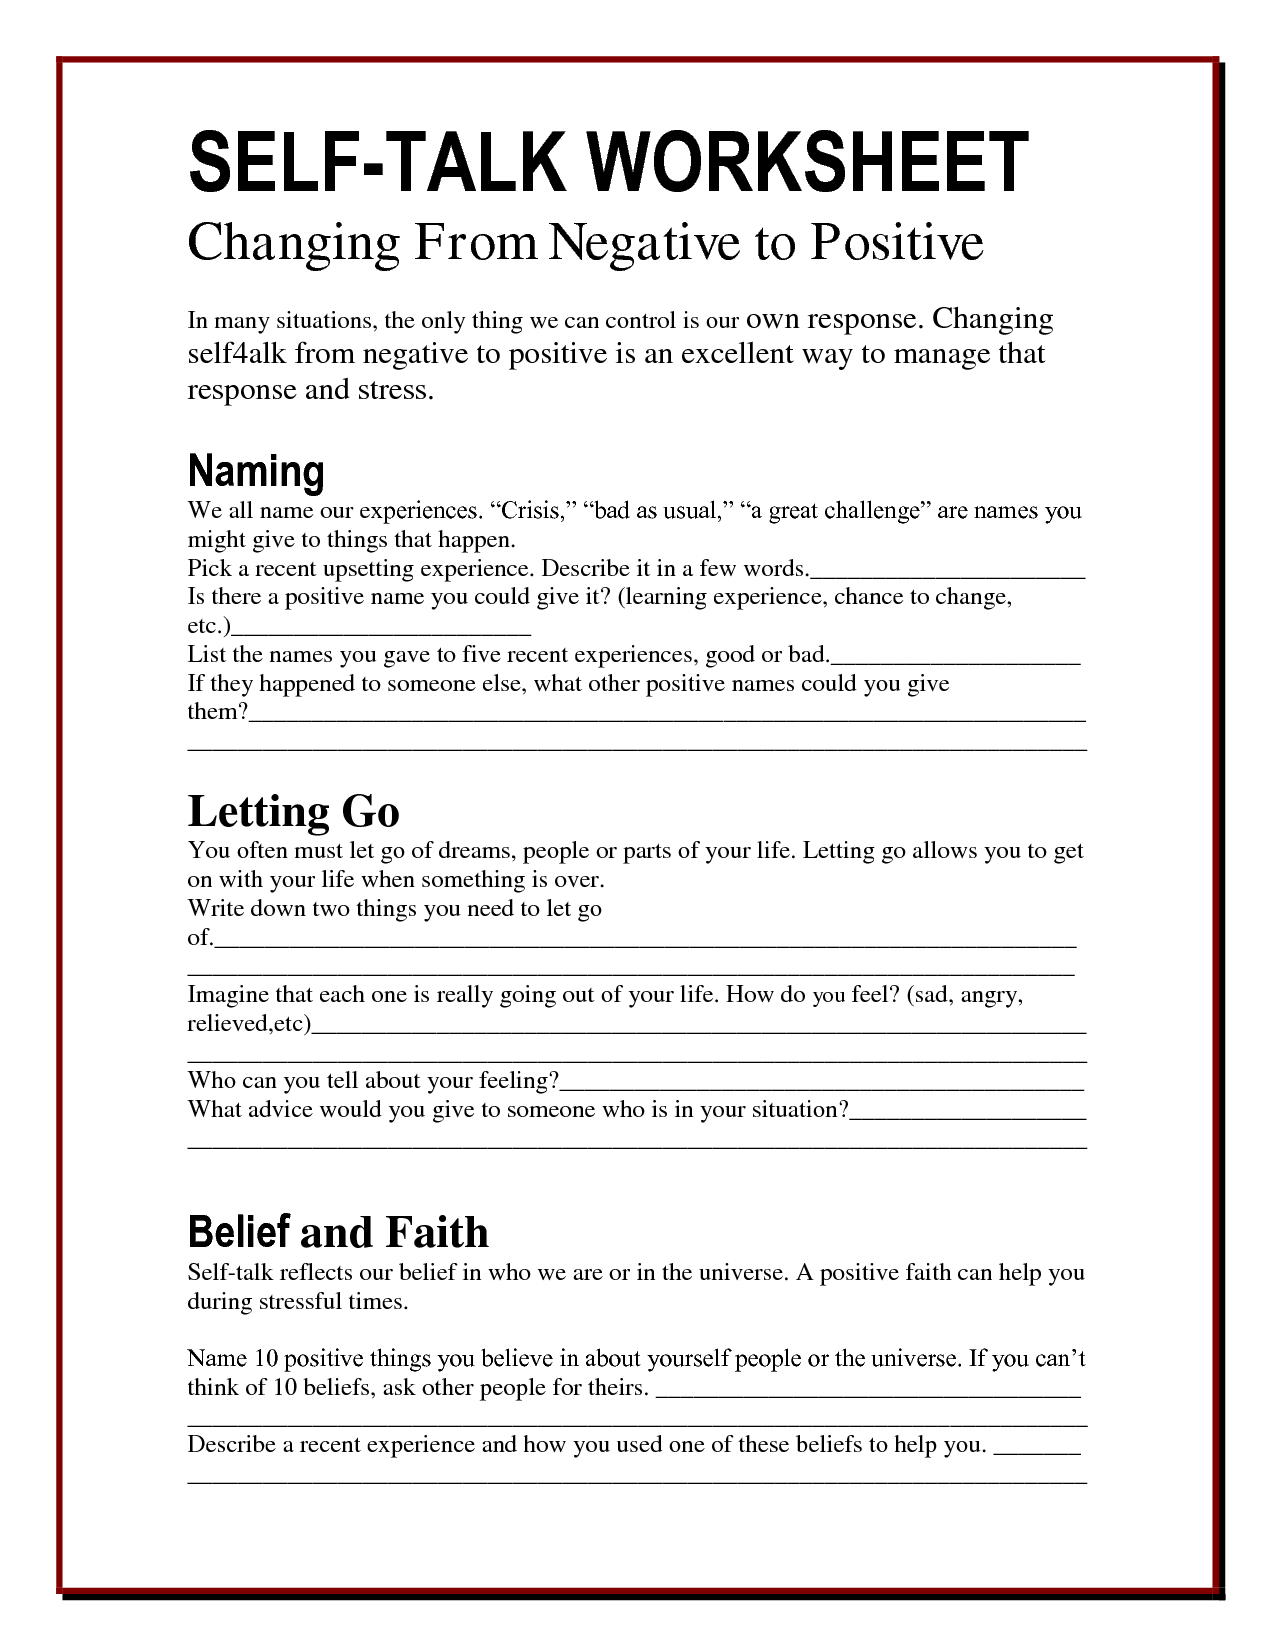 Anger Worksheets | Counseling - Worksheets - Printables | Therapy | Printable Mental Health Worksheets